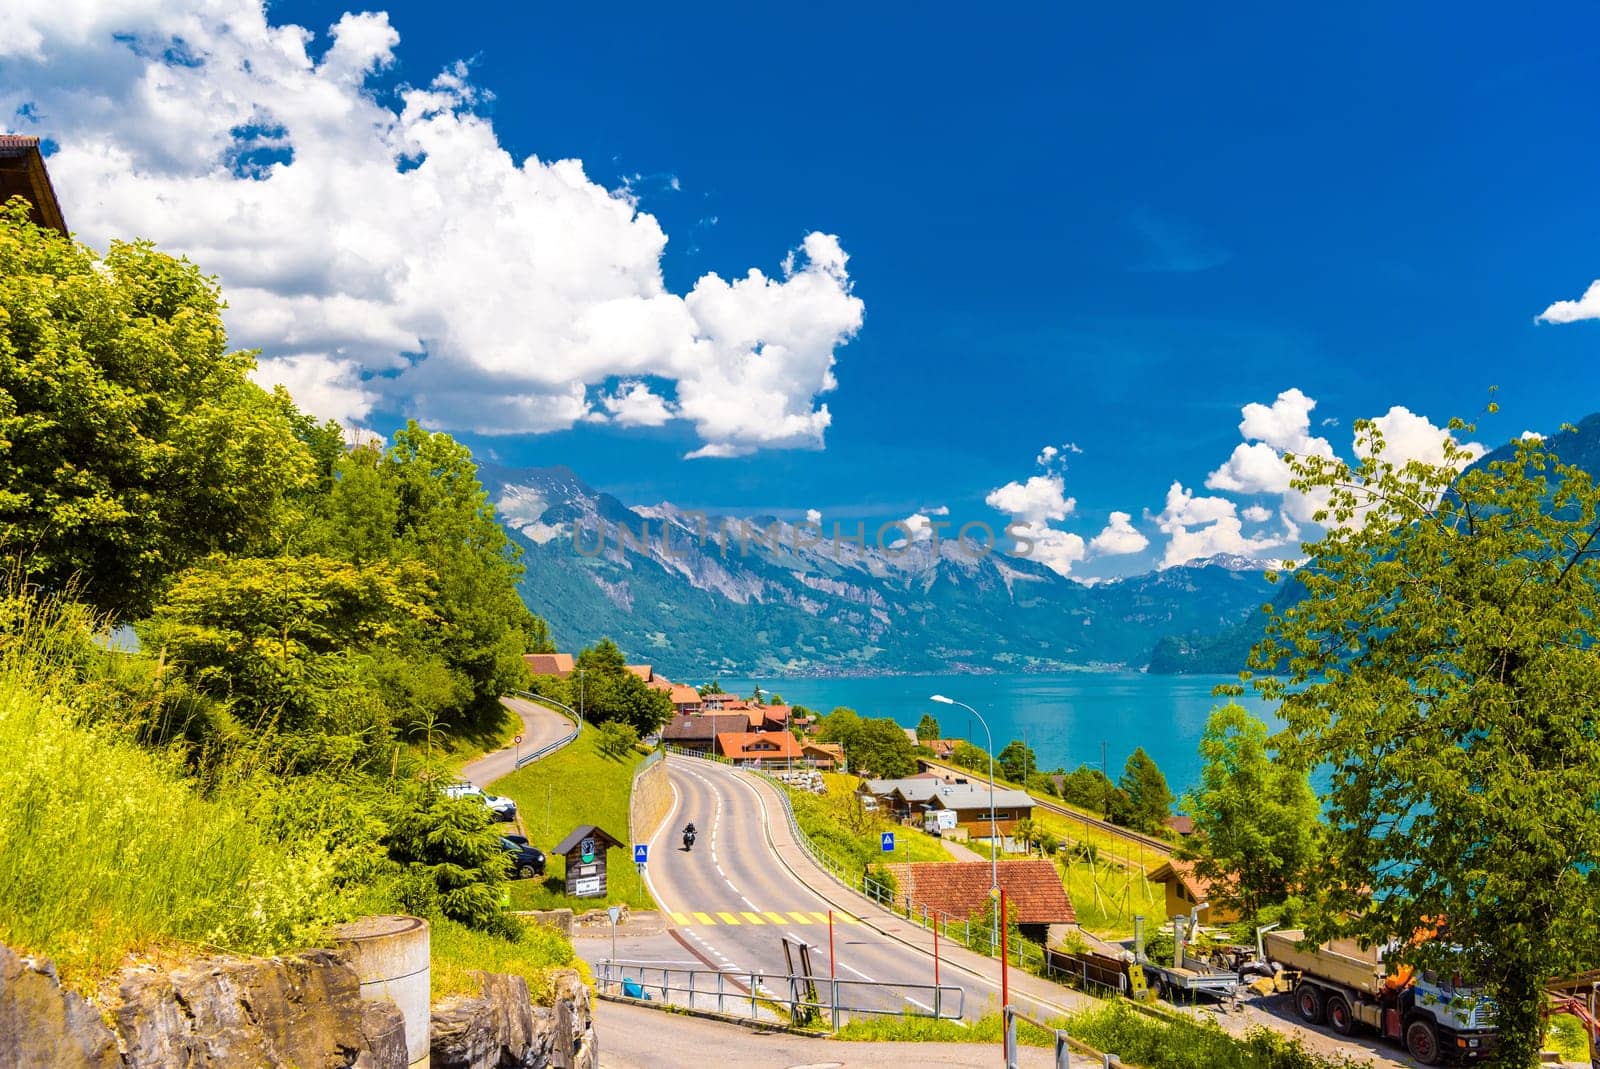 Road in the village and mountains near Lake Brienz, Oberried am by Eagle2308